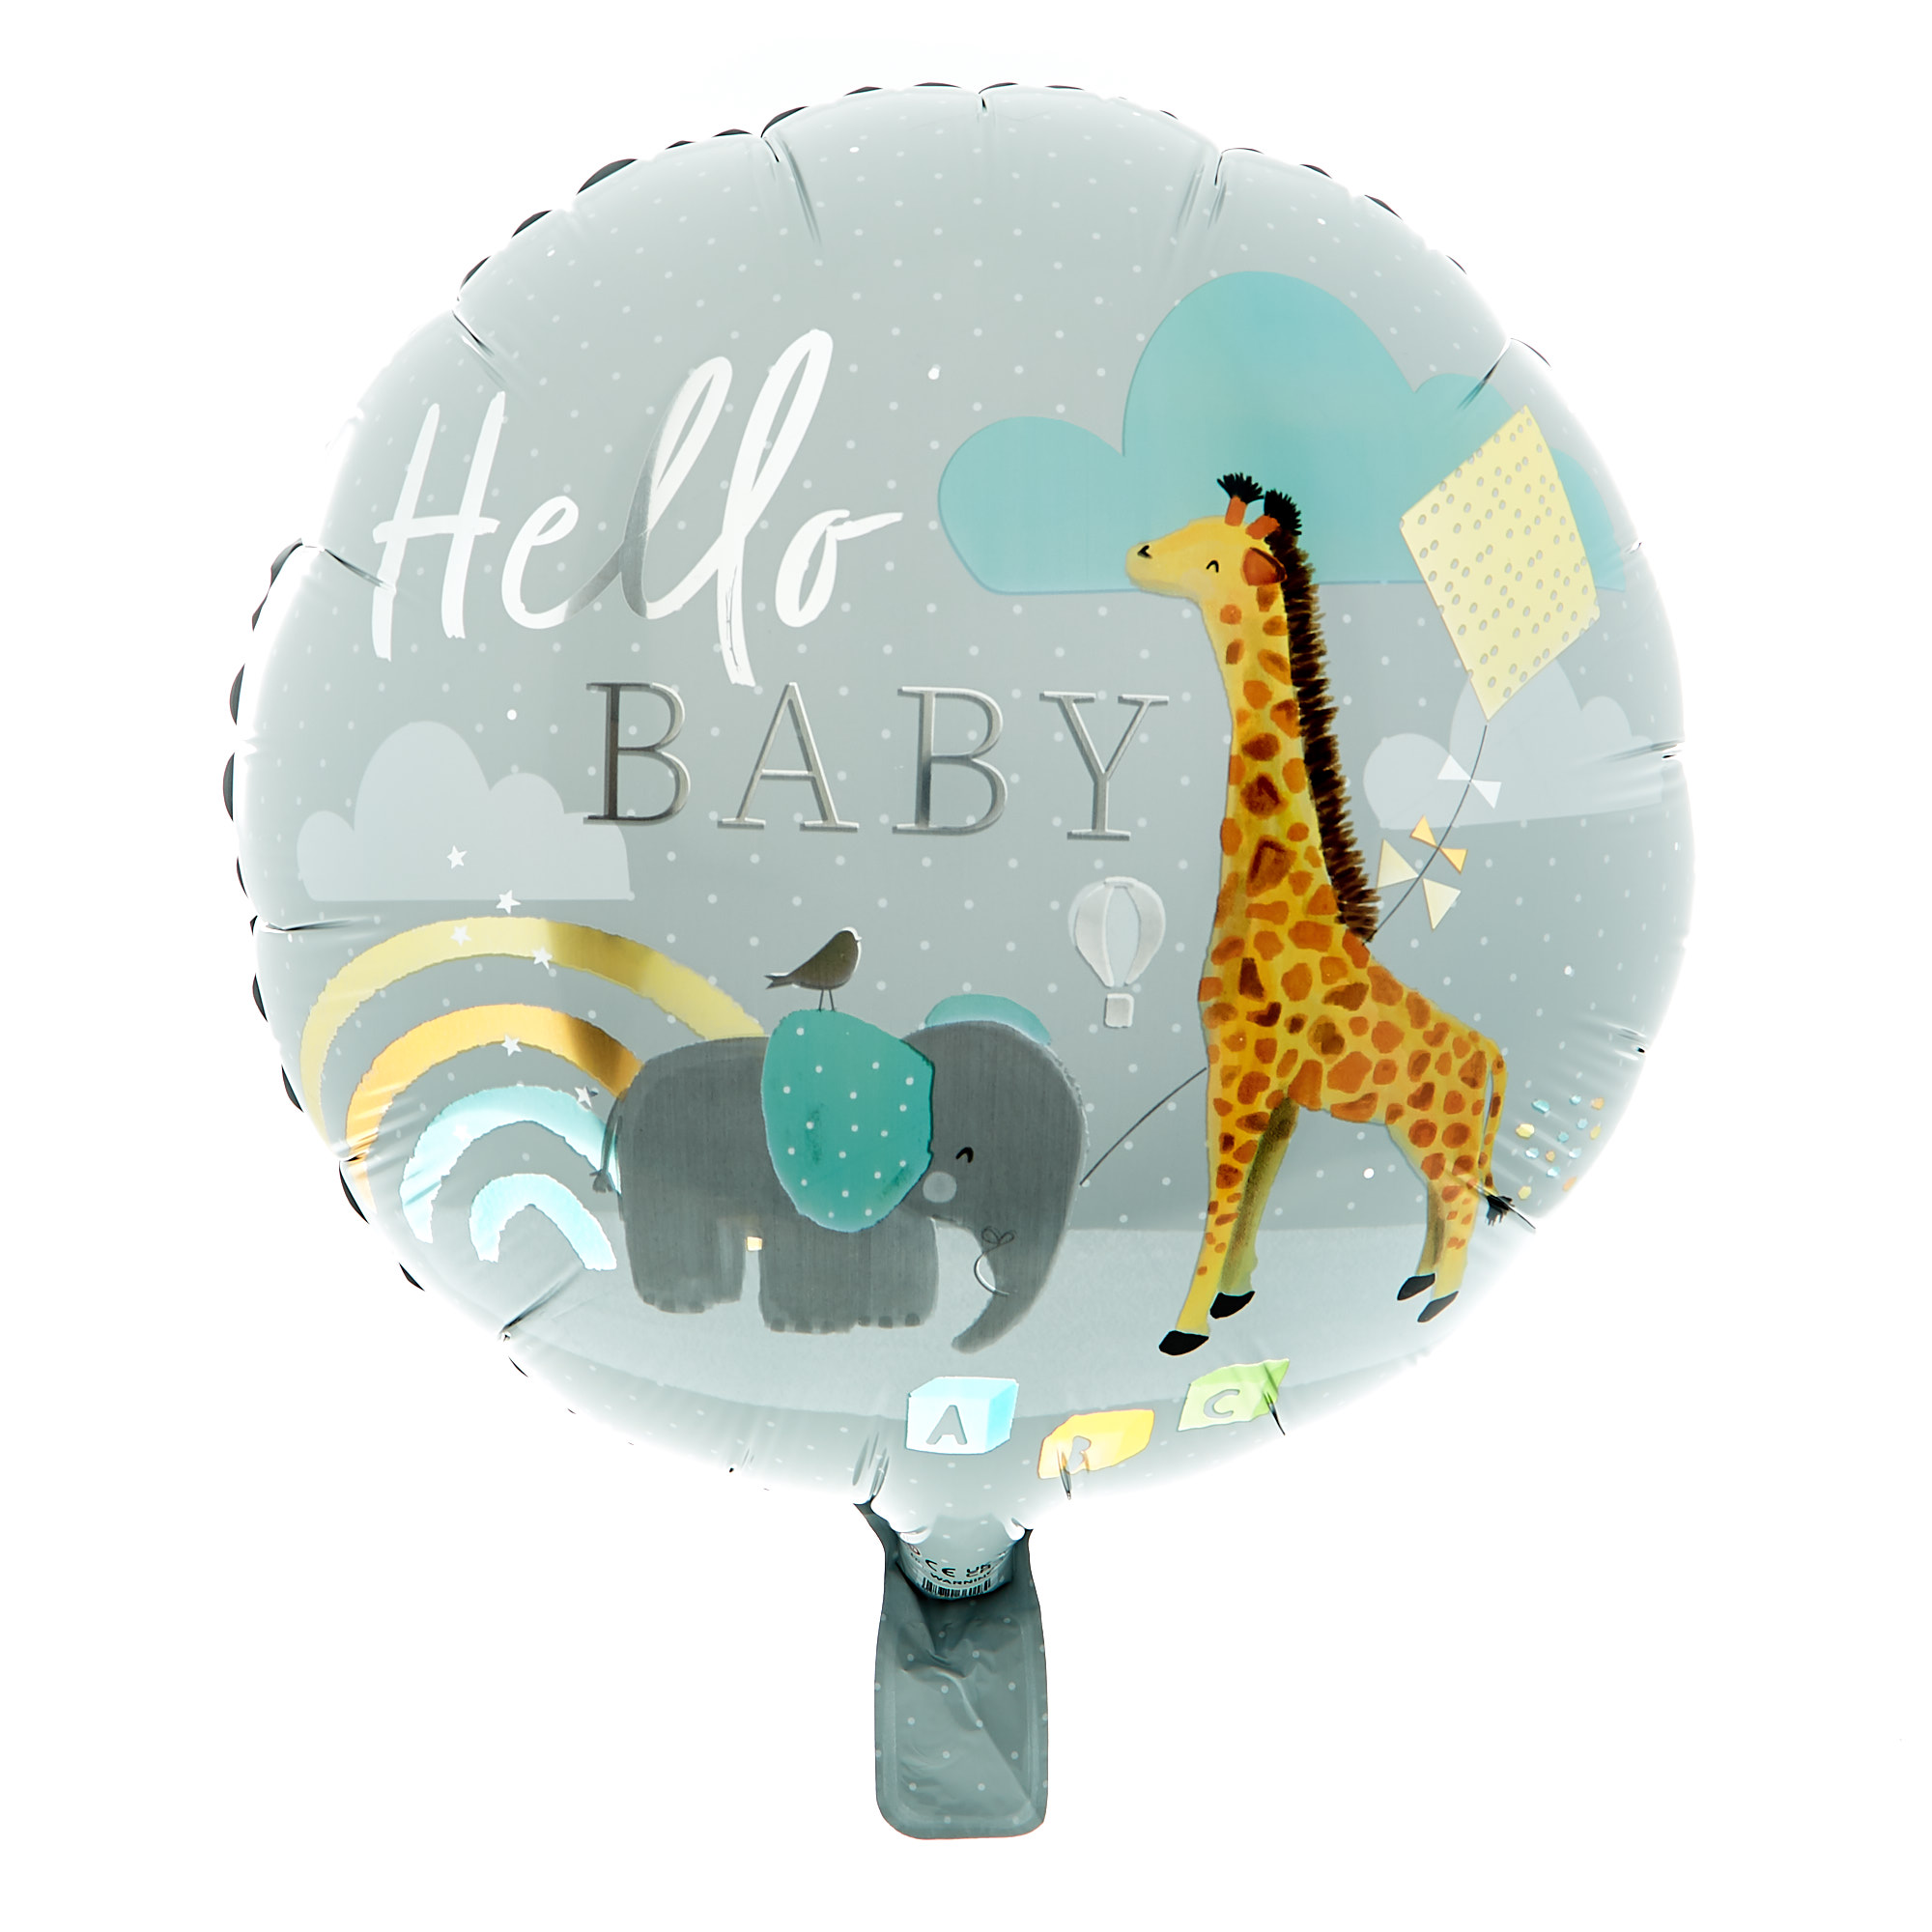 Hello Baby Balloon Bouquet - DELIVERED INFLATED!